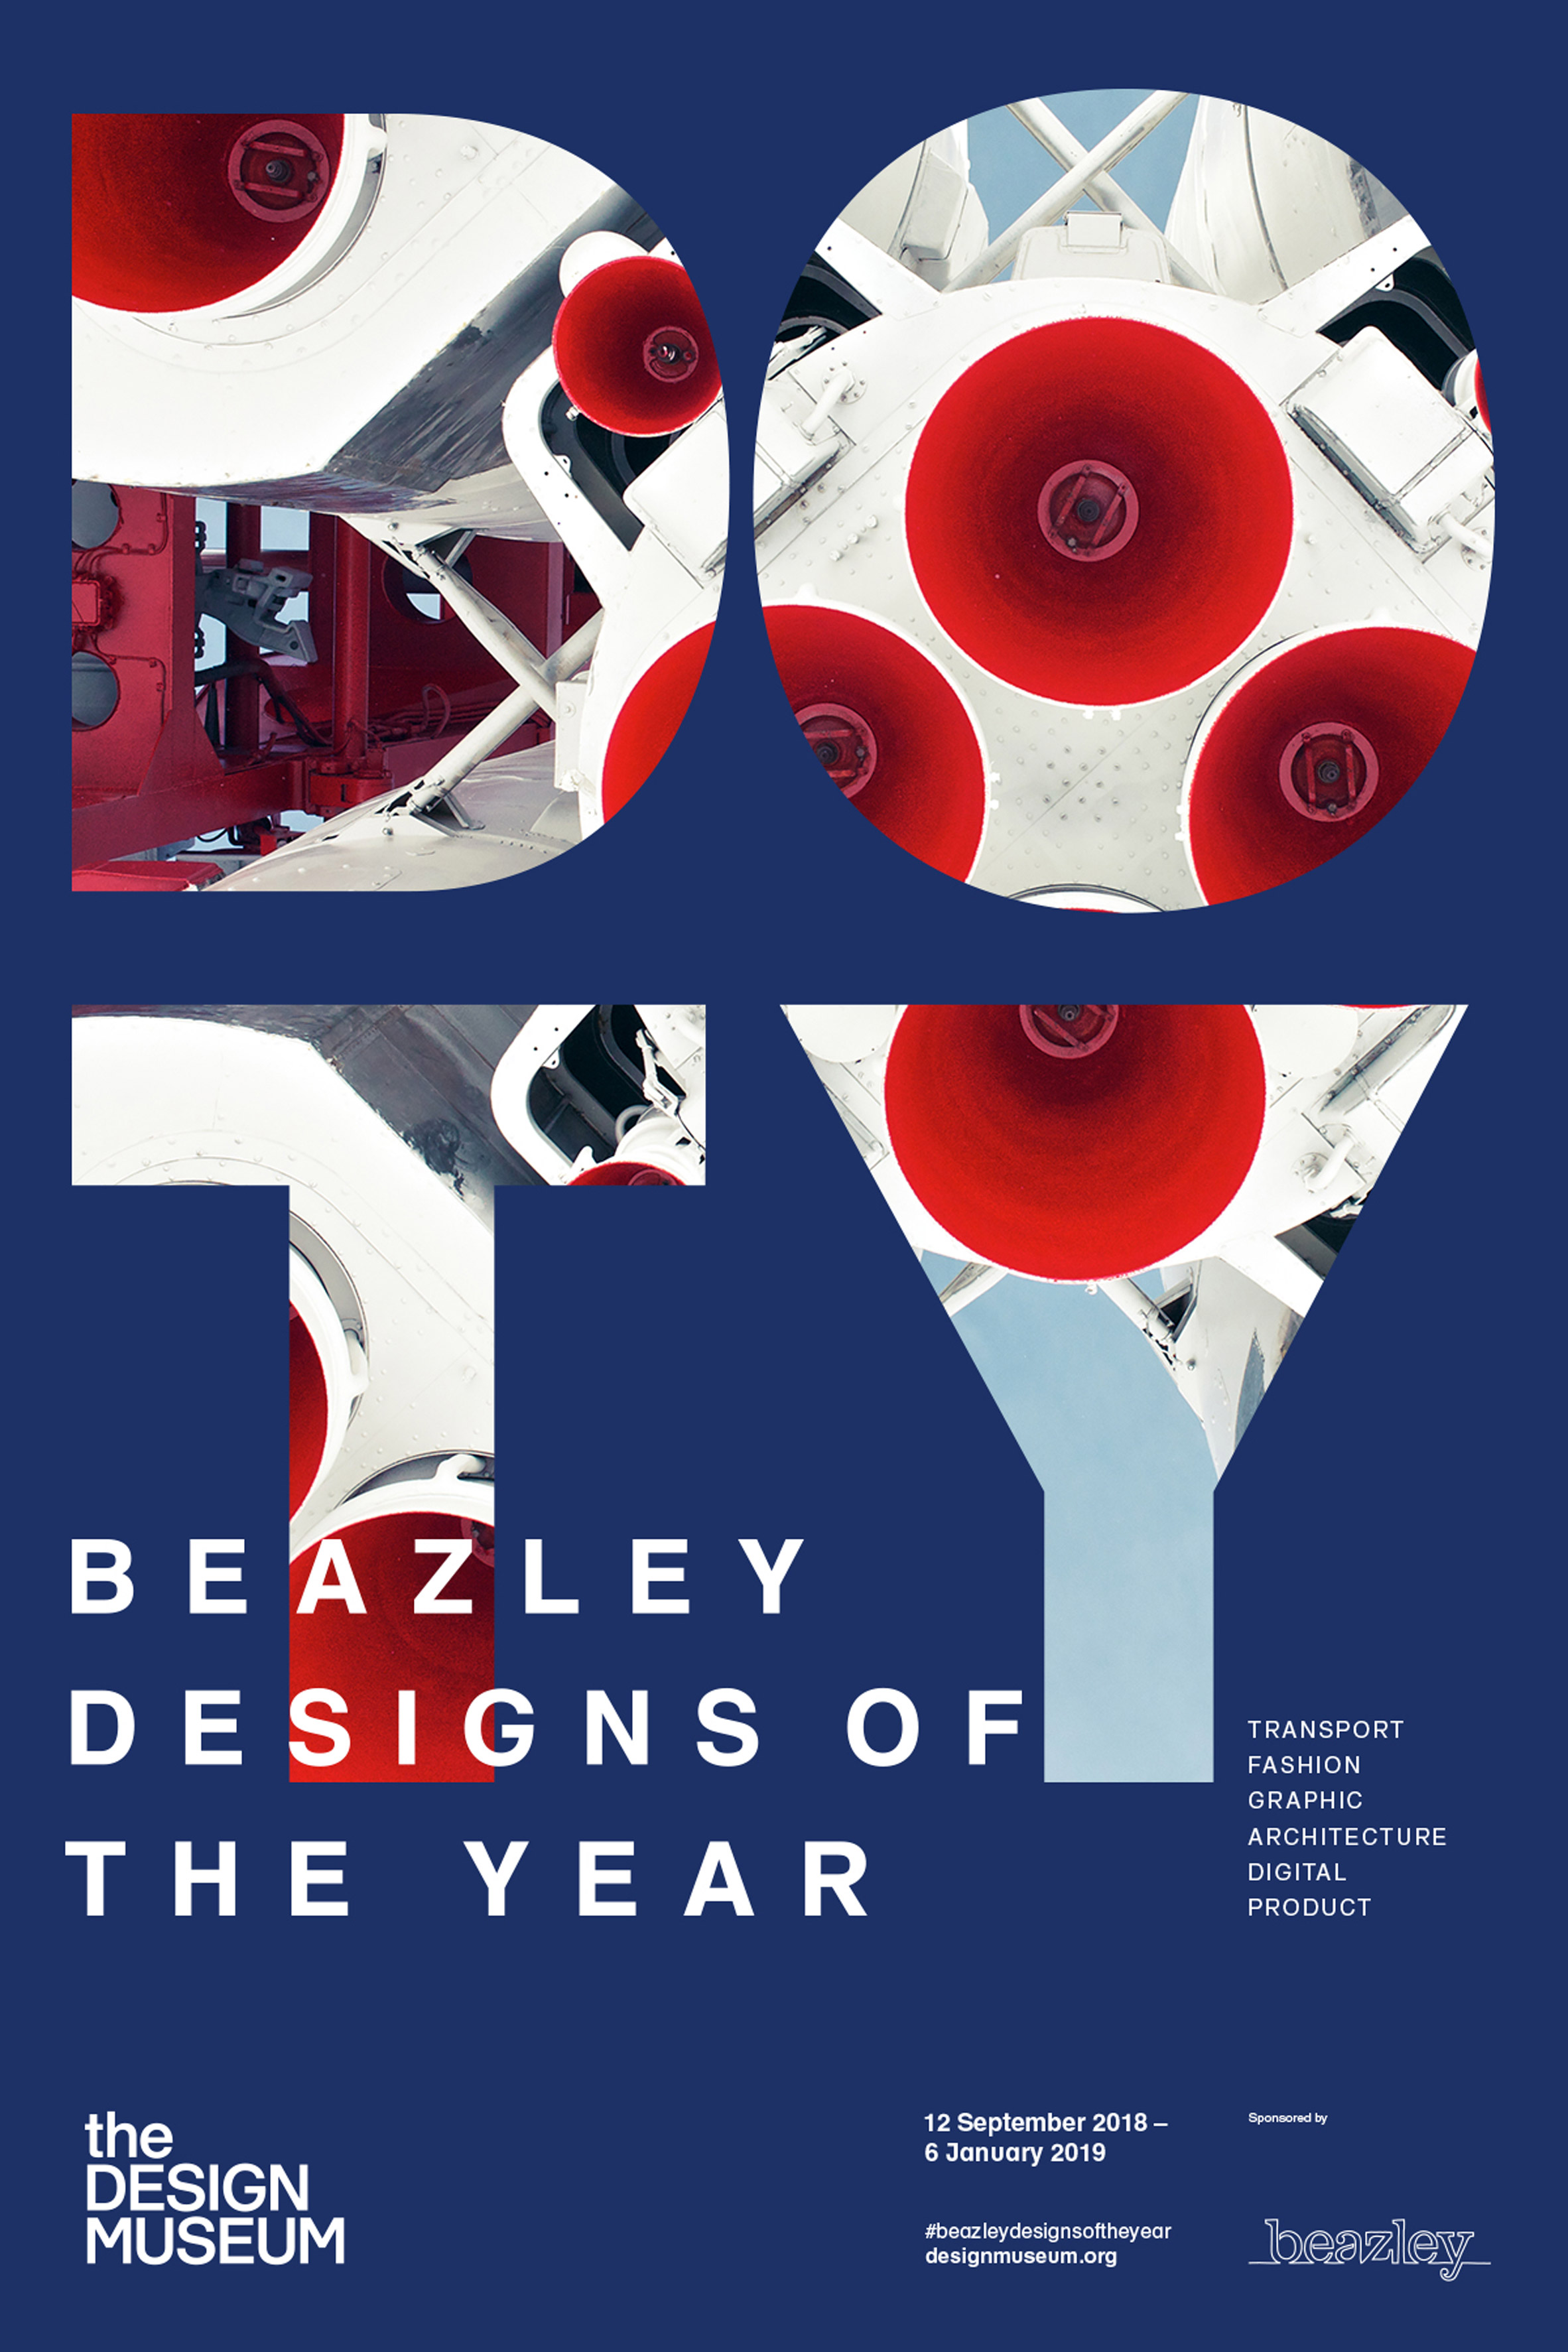 The Design Museum unveils new visual identity for Designs of the Year awards